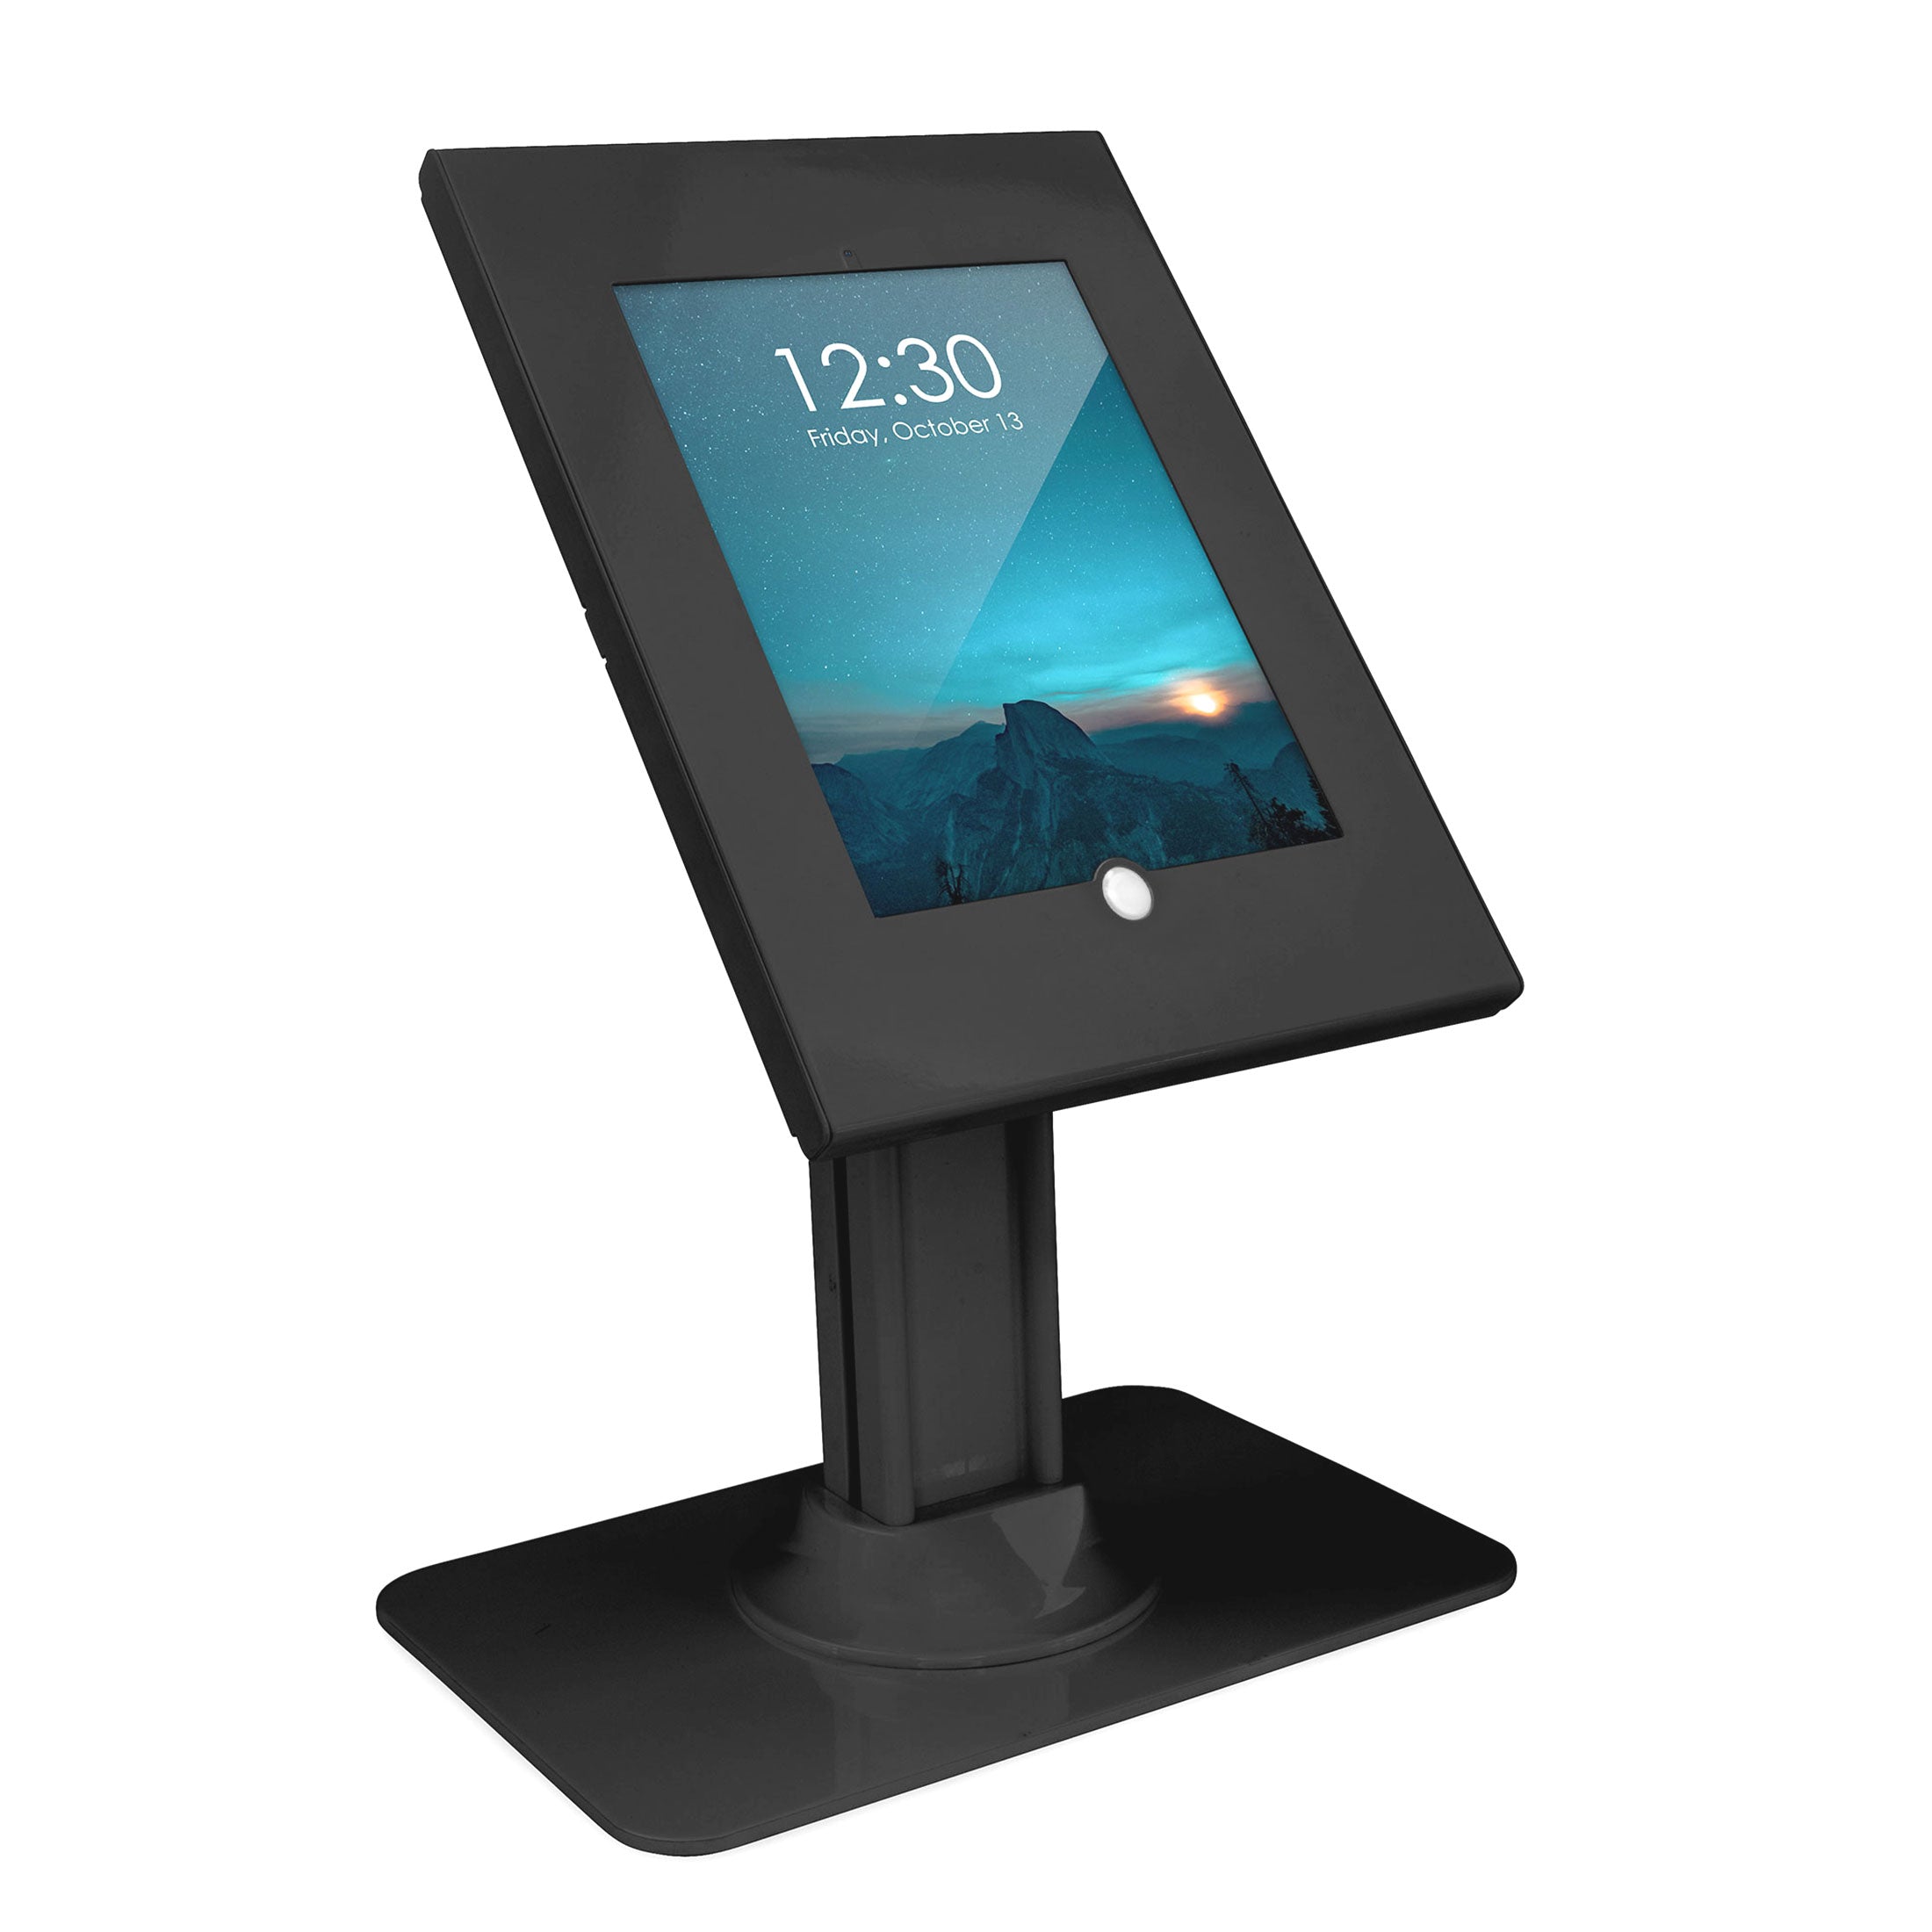 Anti-Theft Tablet Countertop Stand for iPad, iPad Air, iPad Pro